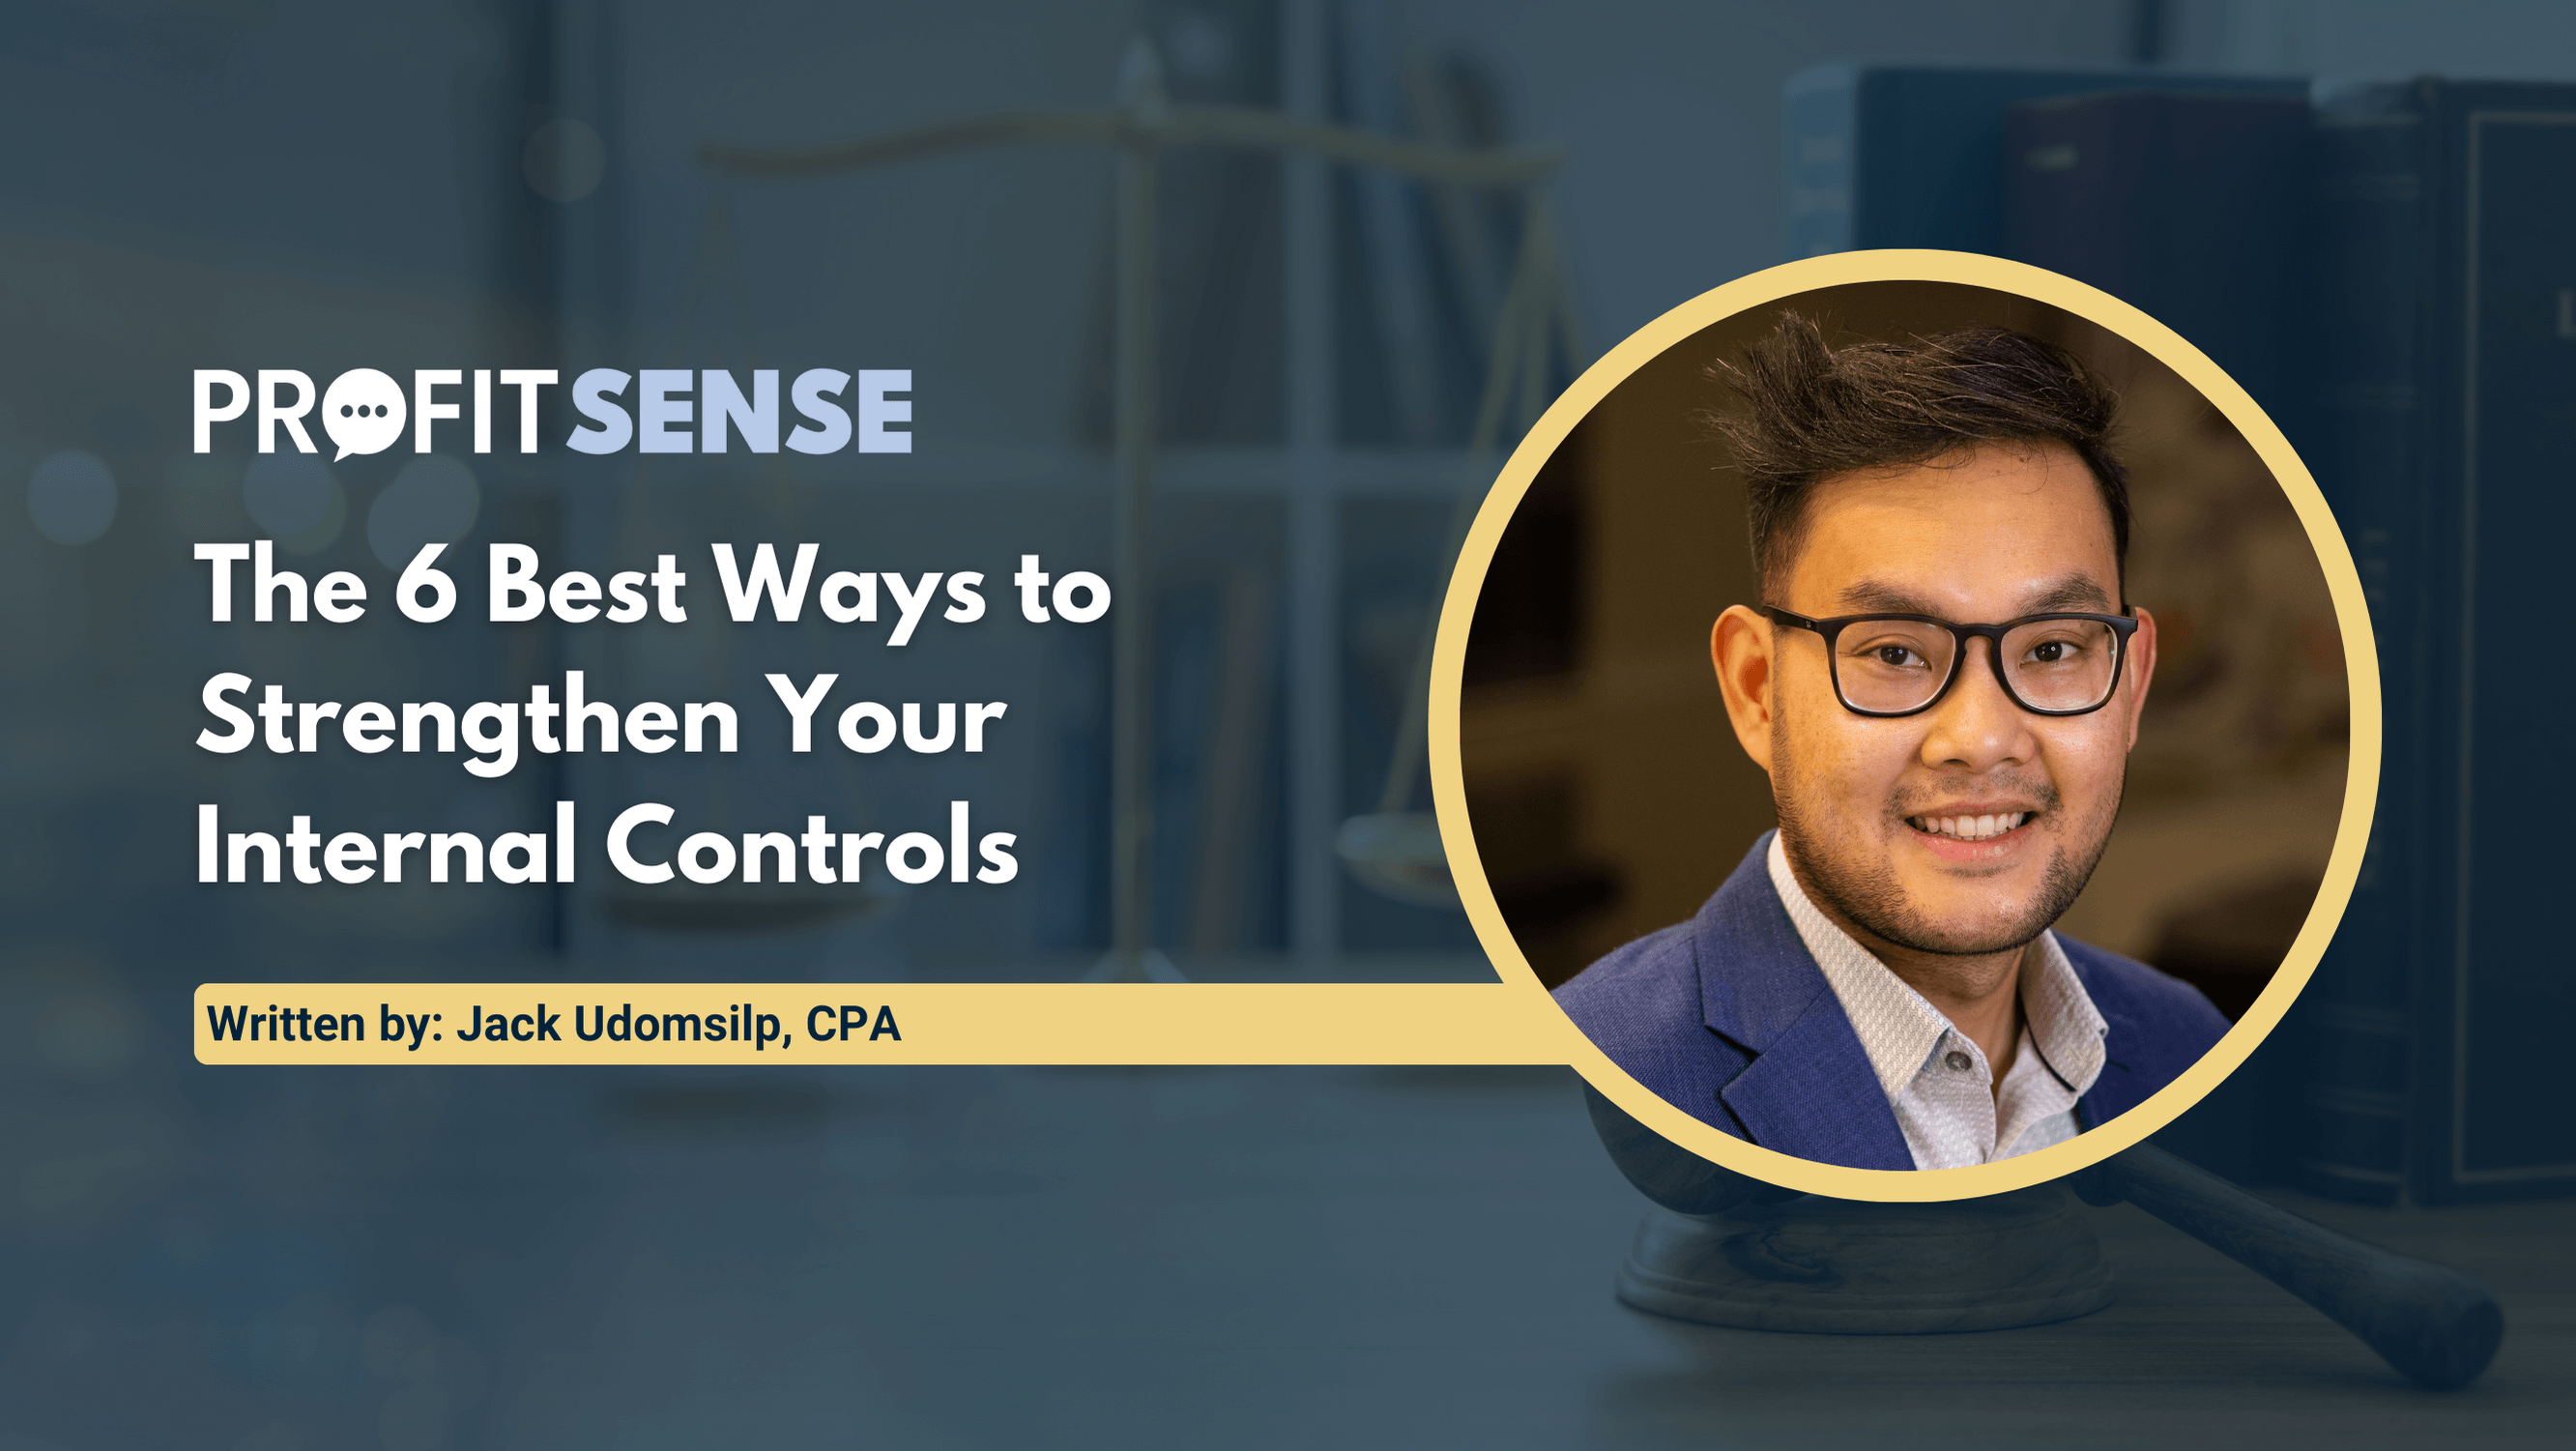 The 6 Best Ways to Strengthen Your Internal Controls